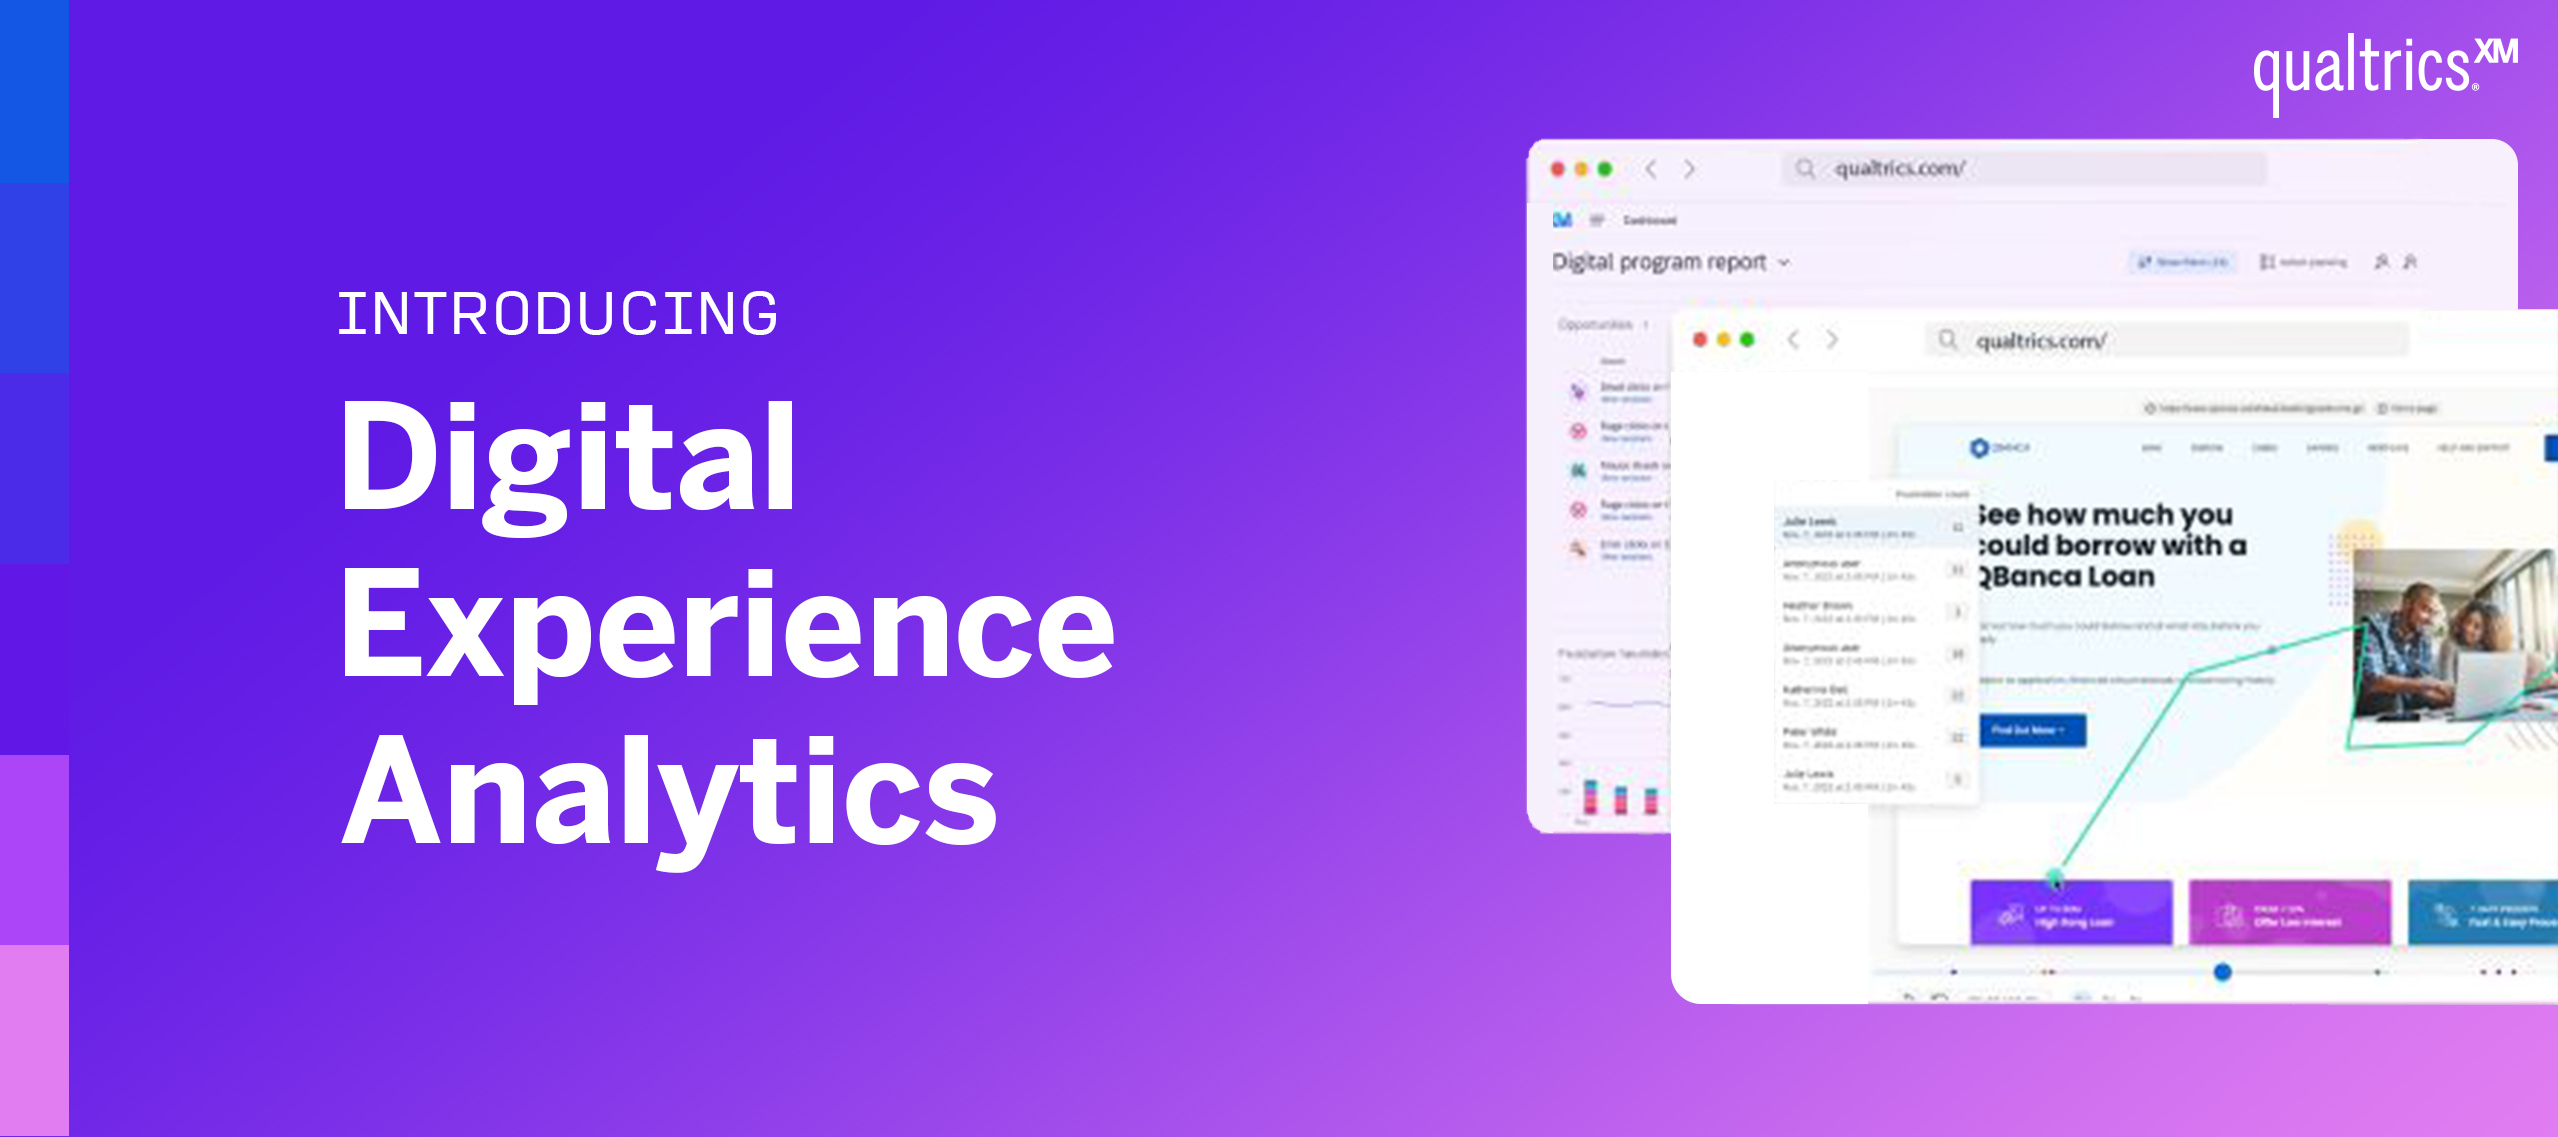 NEWS: Digital Experience Analytics is Now Available! 🎉